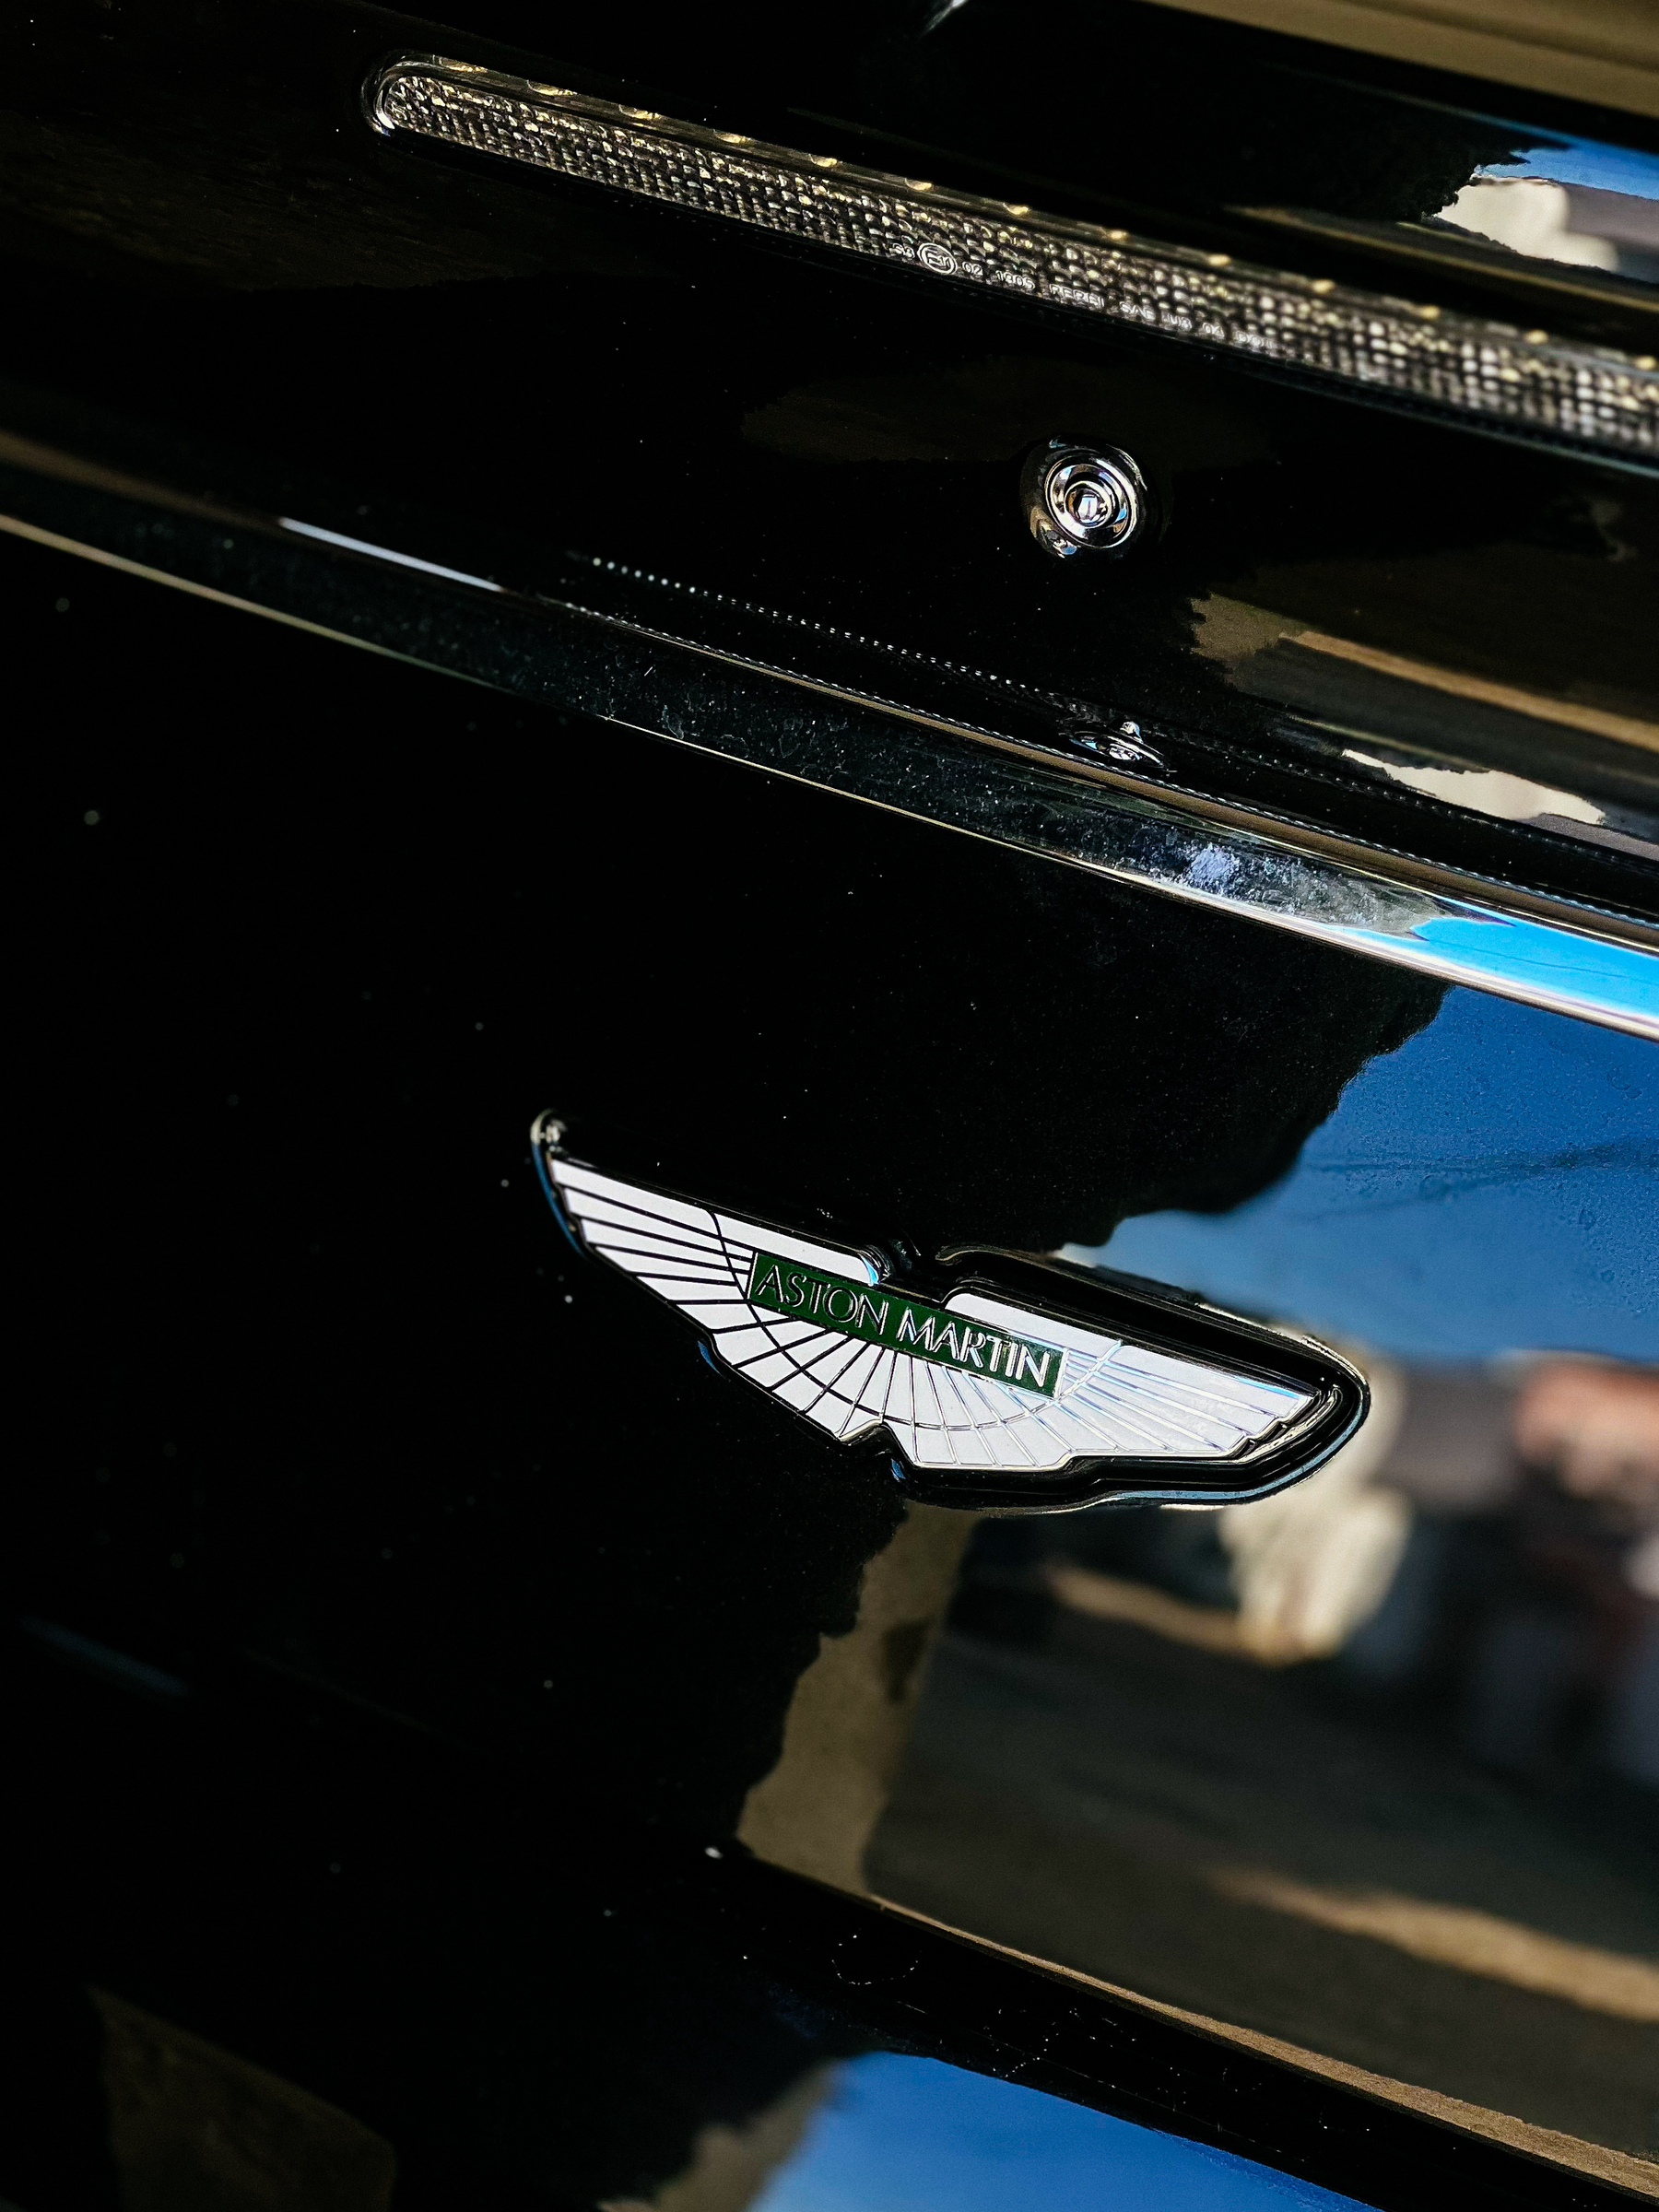 An Aston Martin badge on a glossy black car surface, with reflections visible around the emblem.